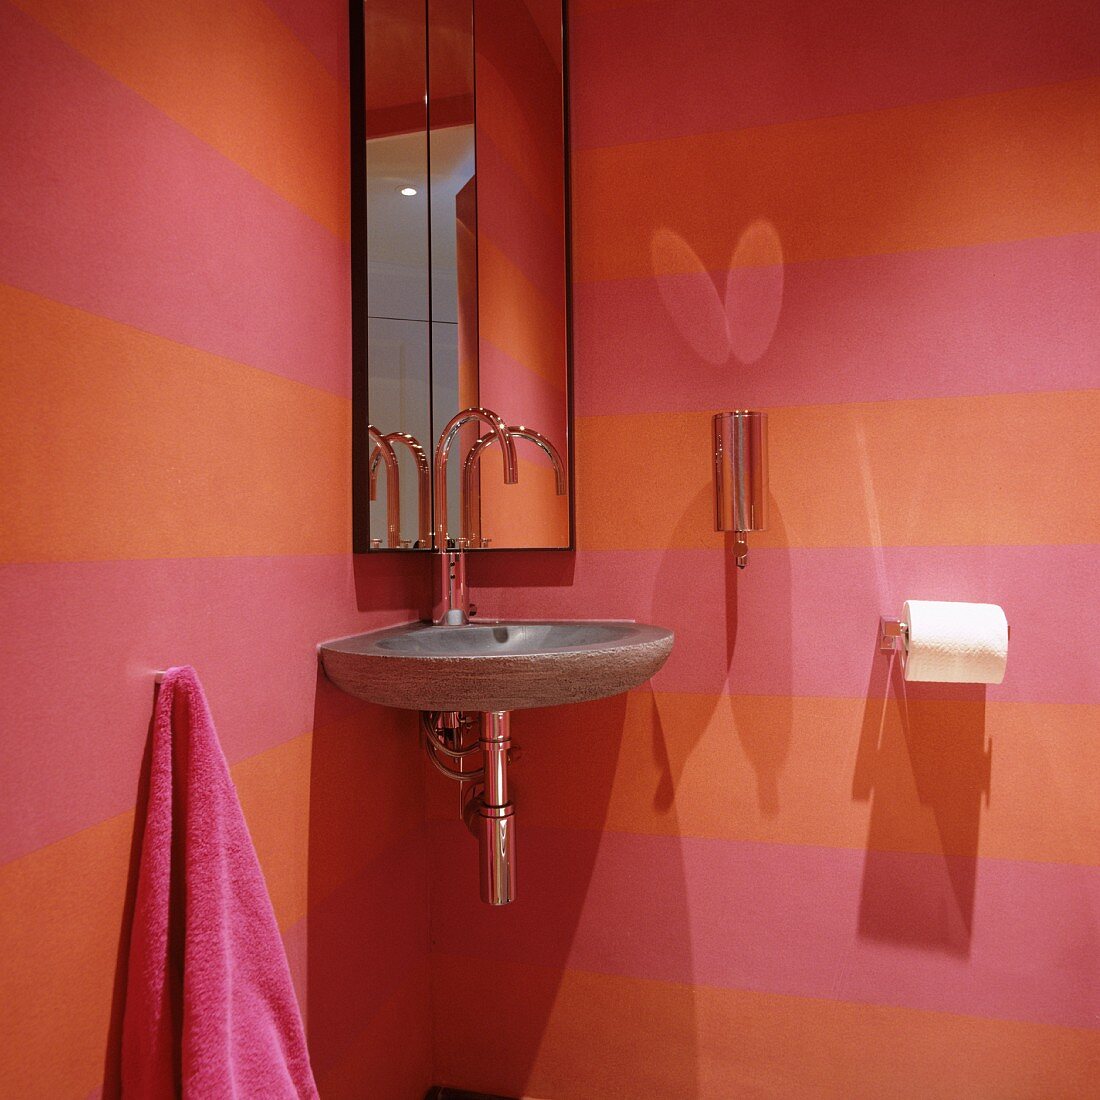 Stone corner washbasin and mirrored cabinet in pink and orange striped guest toilet